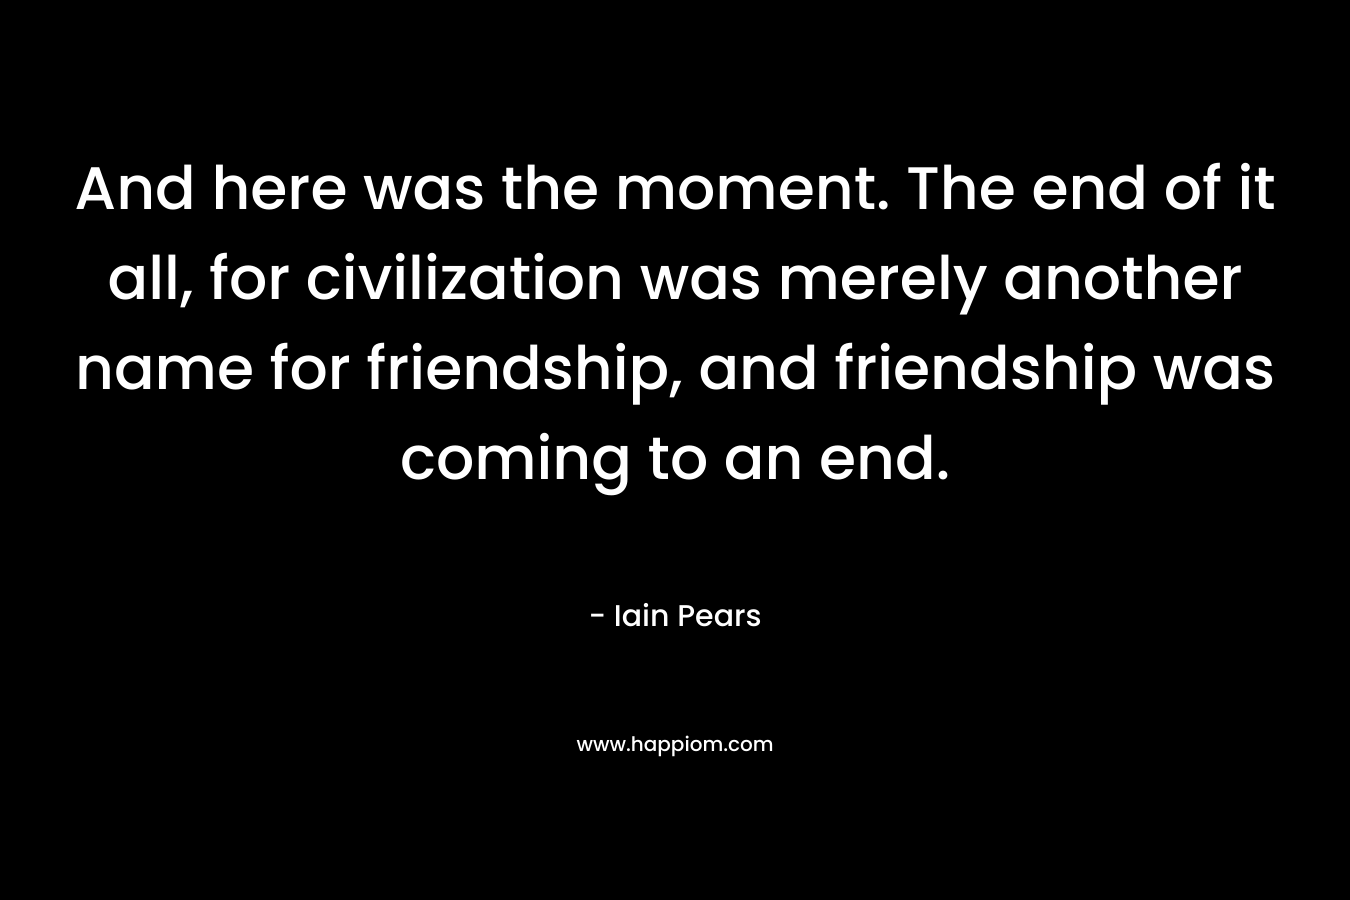 And here was the moment. The end of it all, for civilization was merely another name for friendship, and friendship was coming to an end.